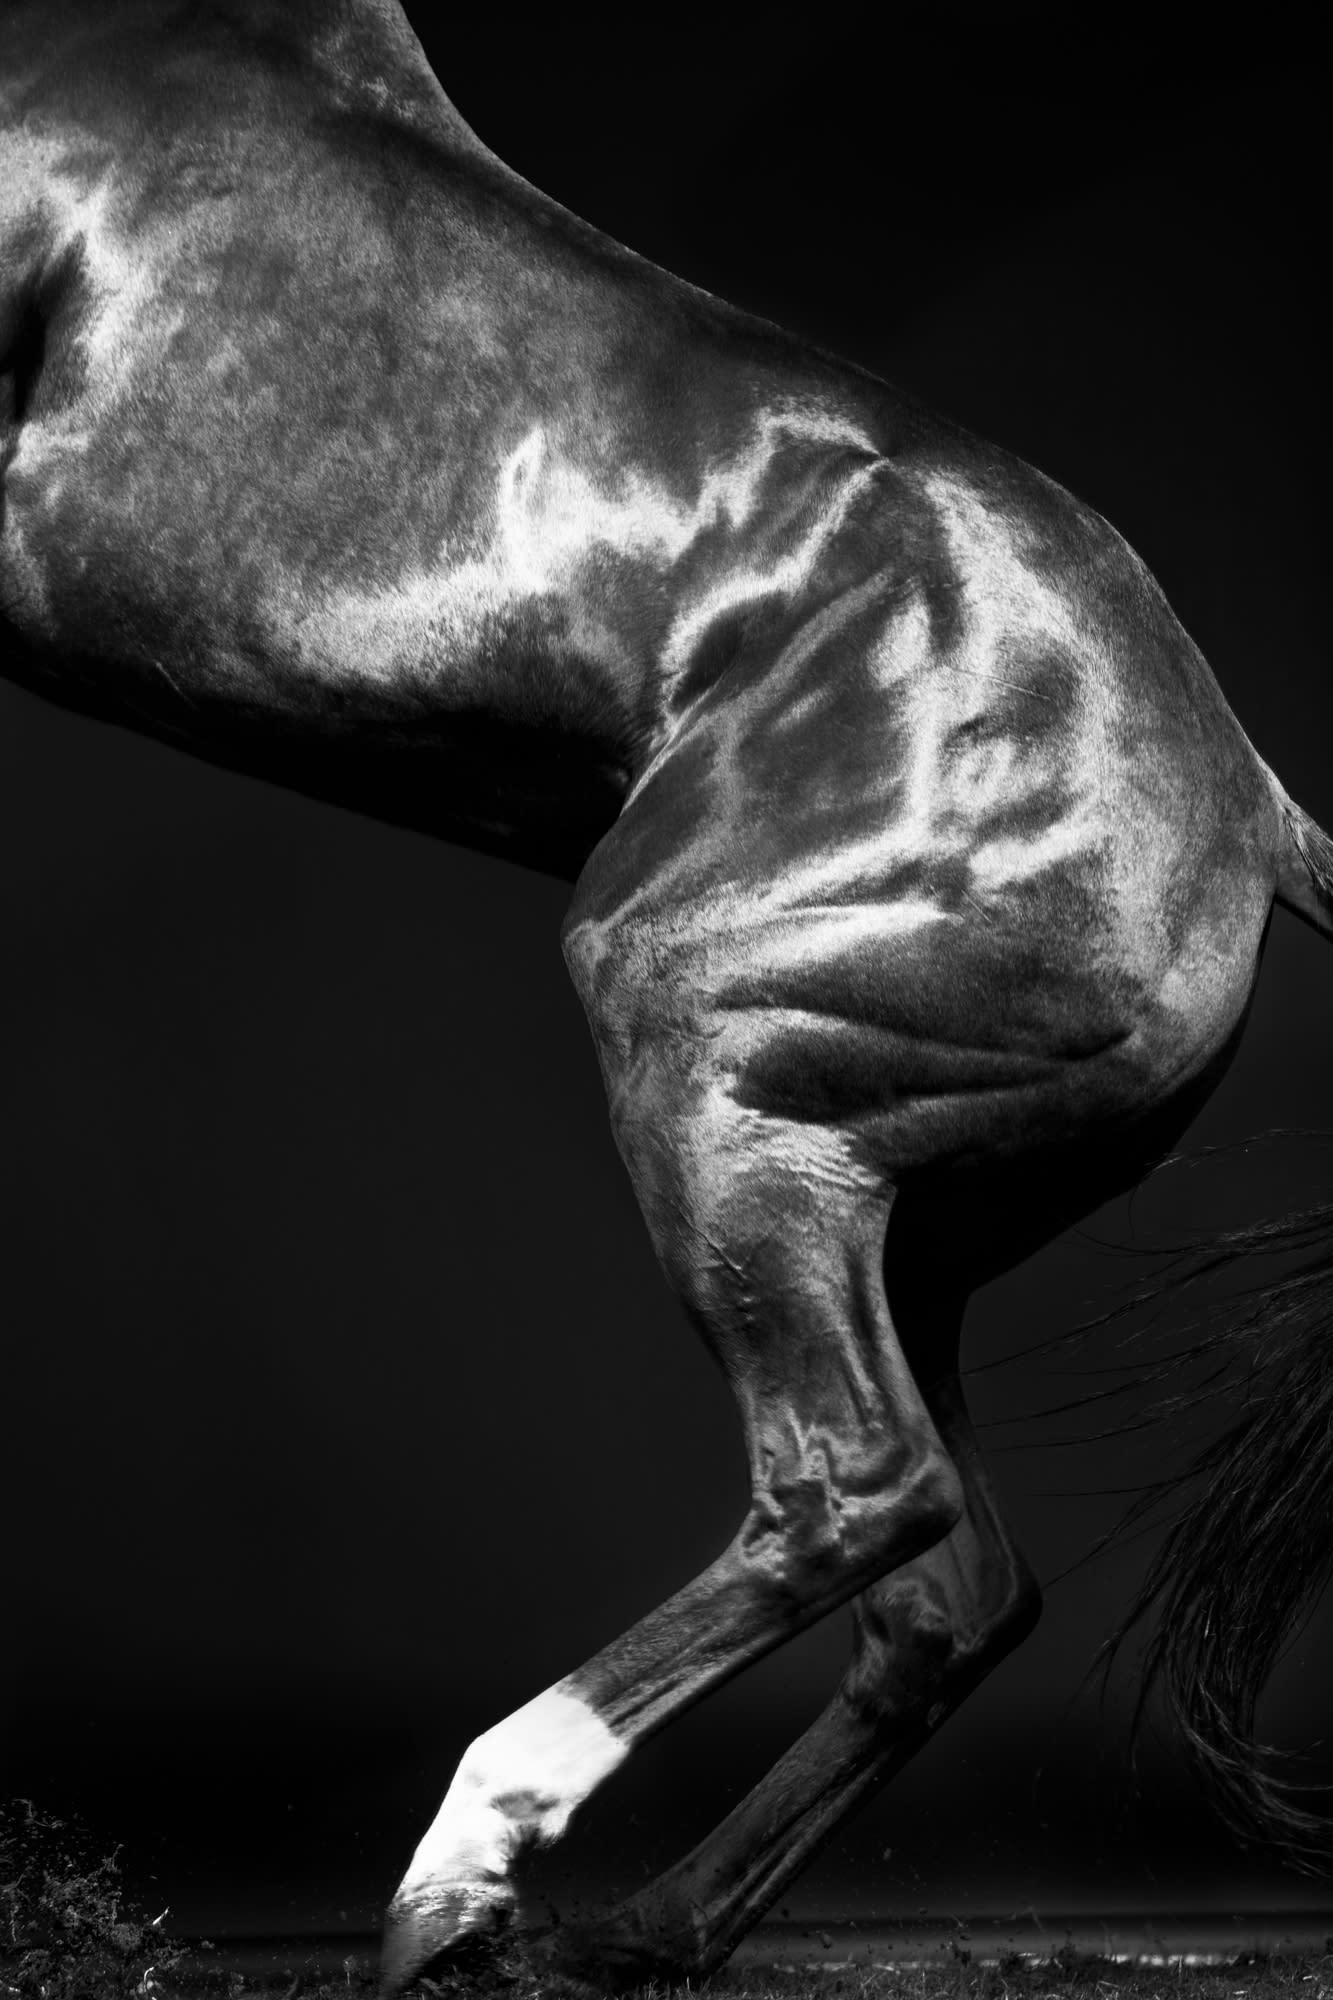 Rusa Legs I - Black and White Limited Edition Horse Portrait 2015 - Photograph by Juan Lamarca